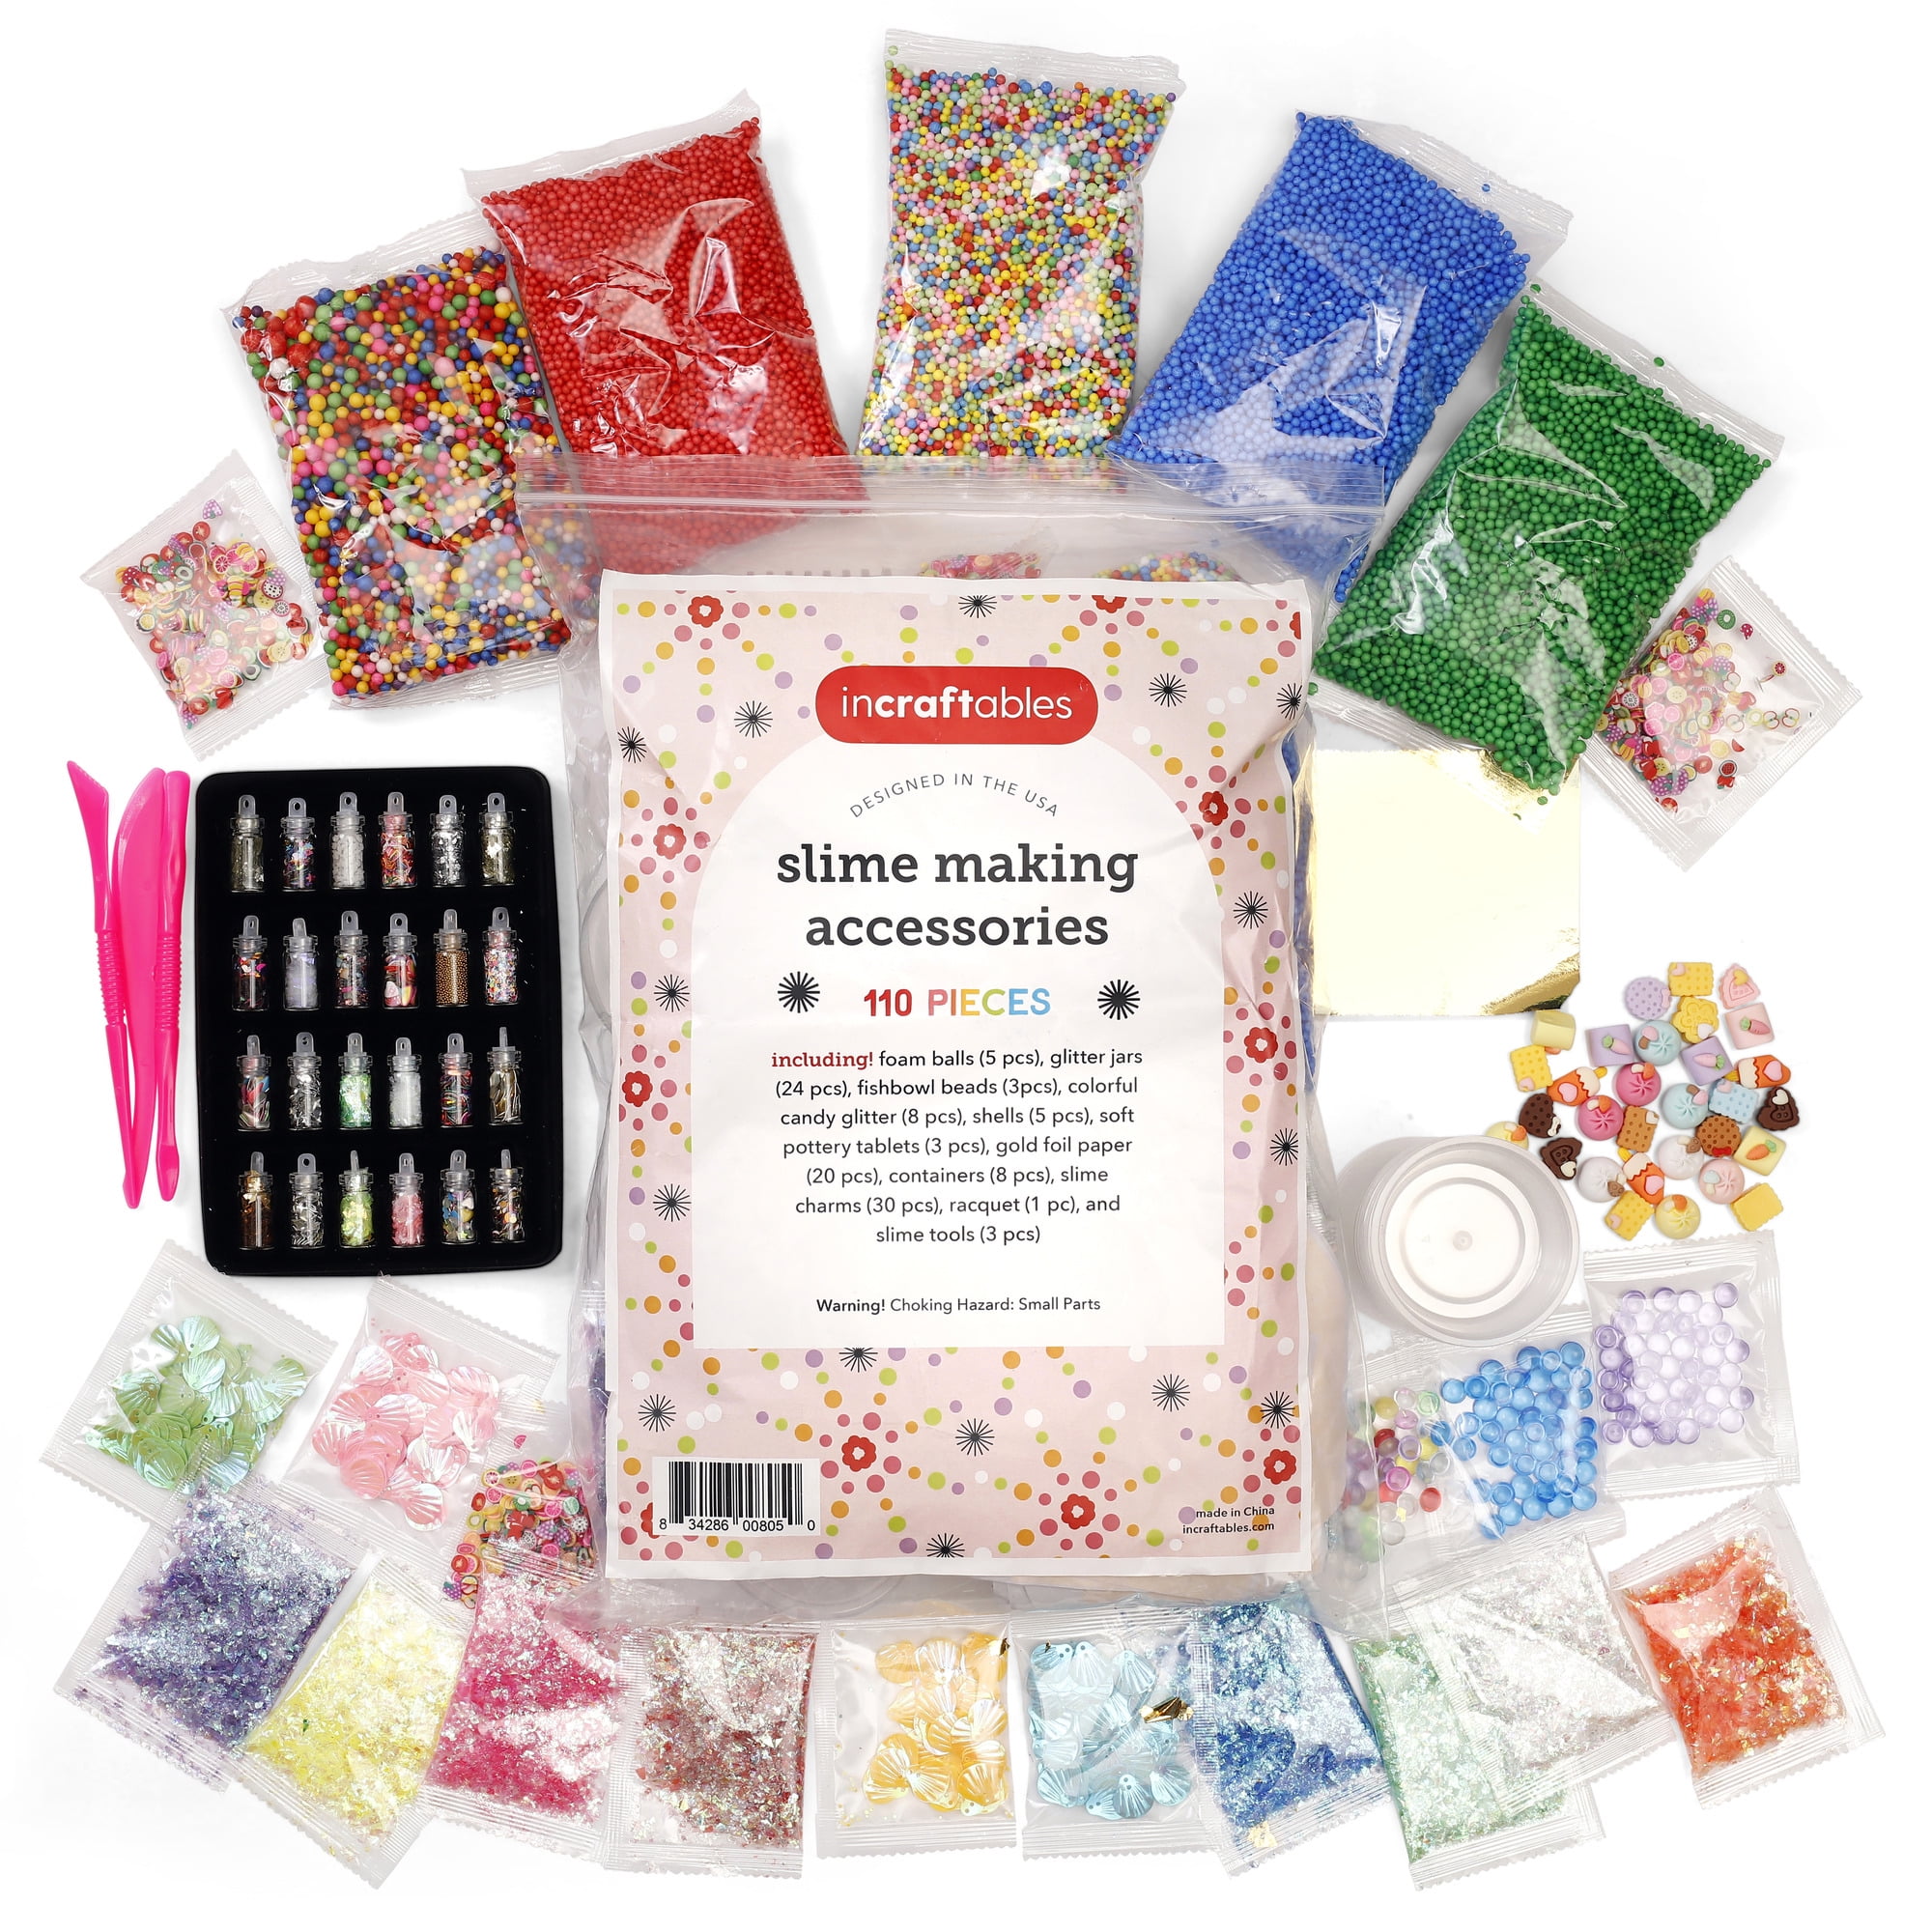 Incraftables Fuse Beads Kit 4000pcs (16 Colors). Hama Melting Beads for  Kids Crafts 5mm Unisex 